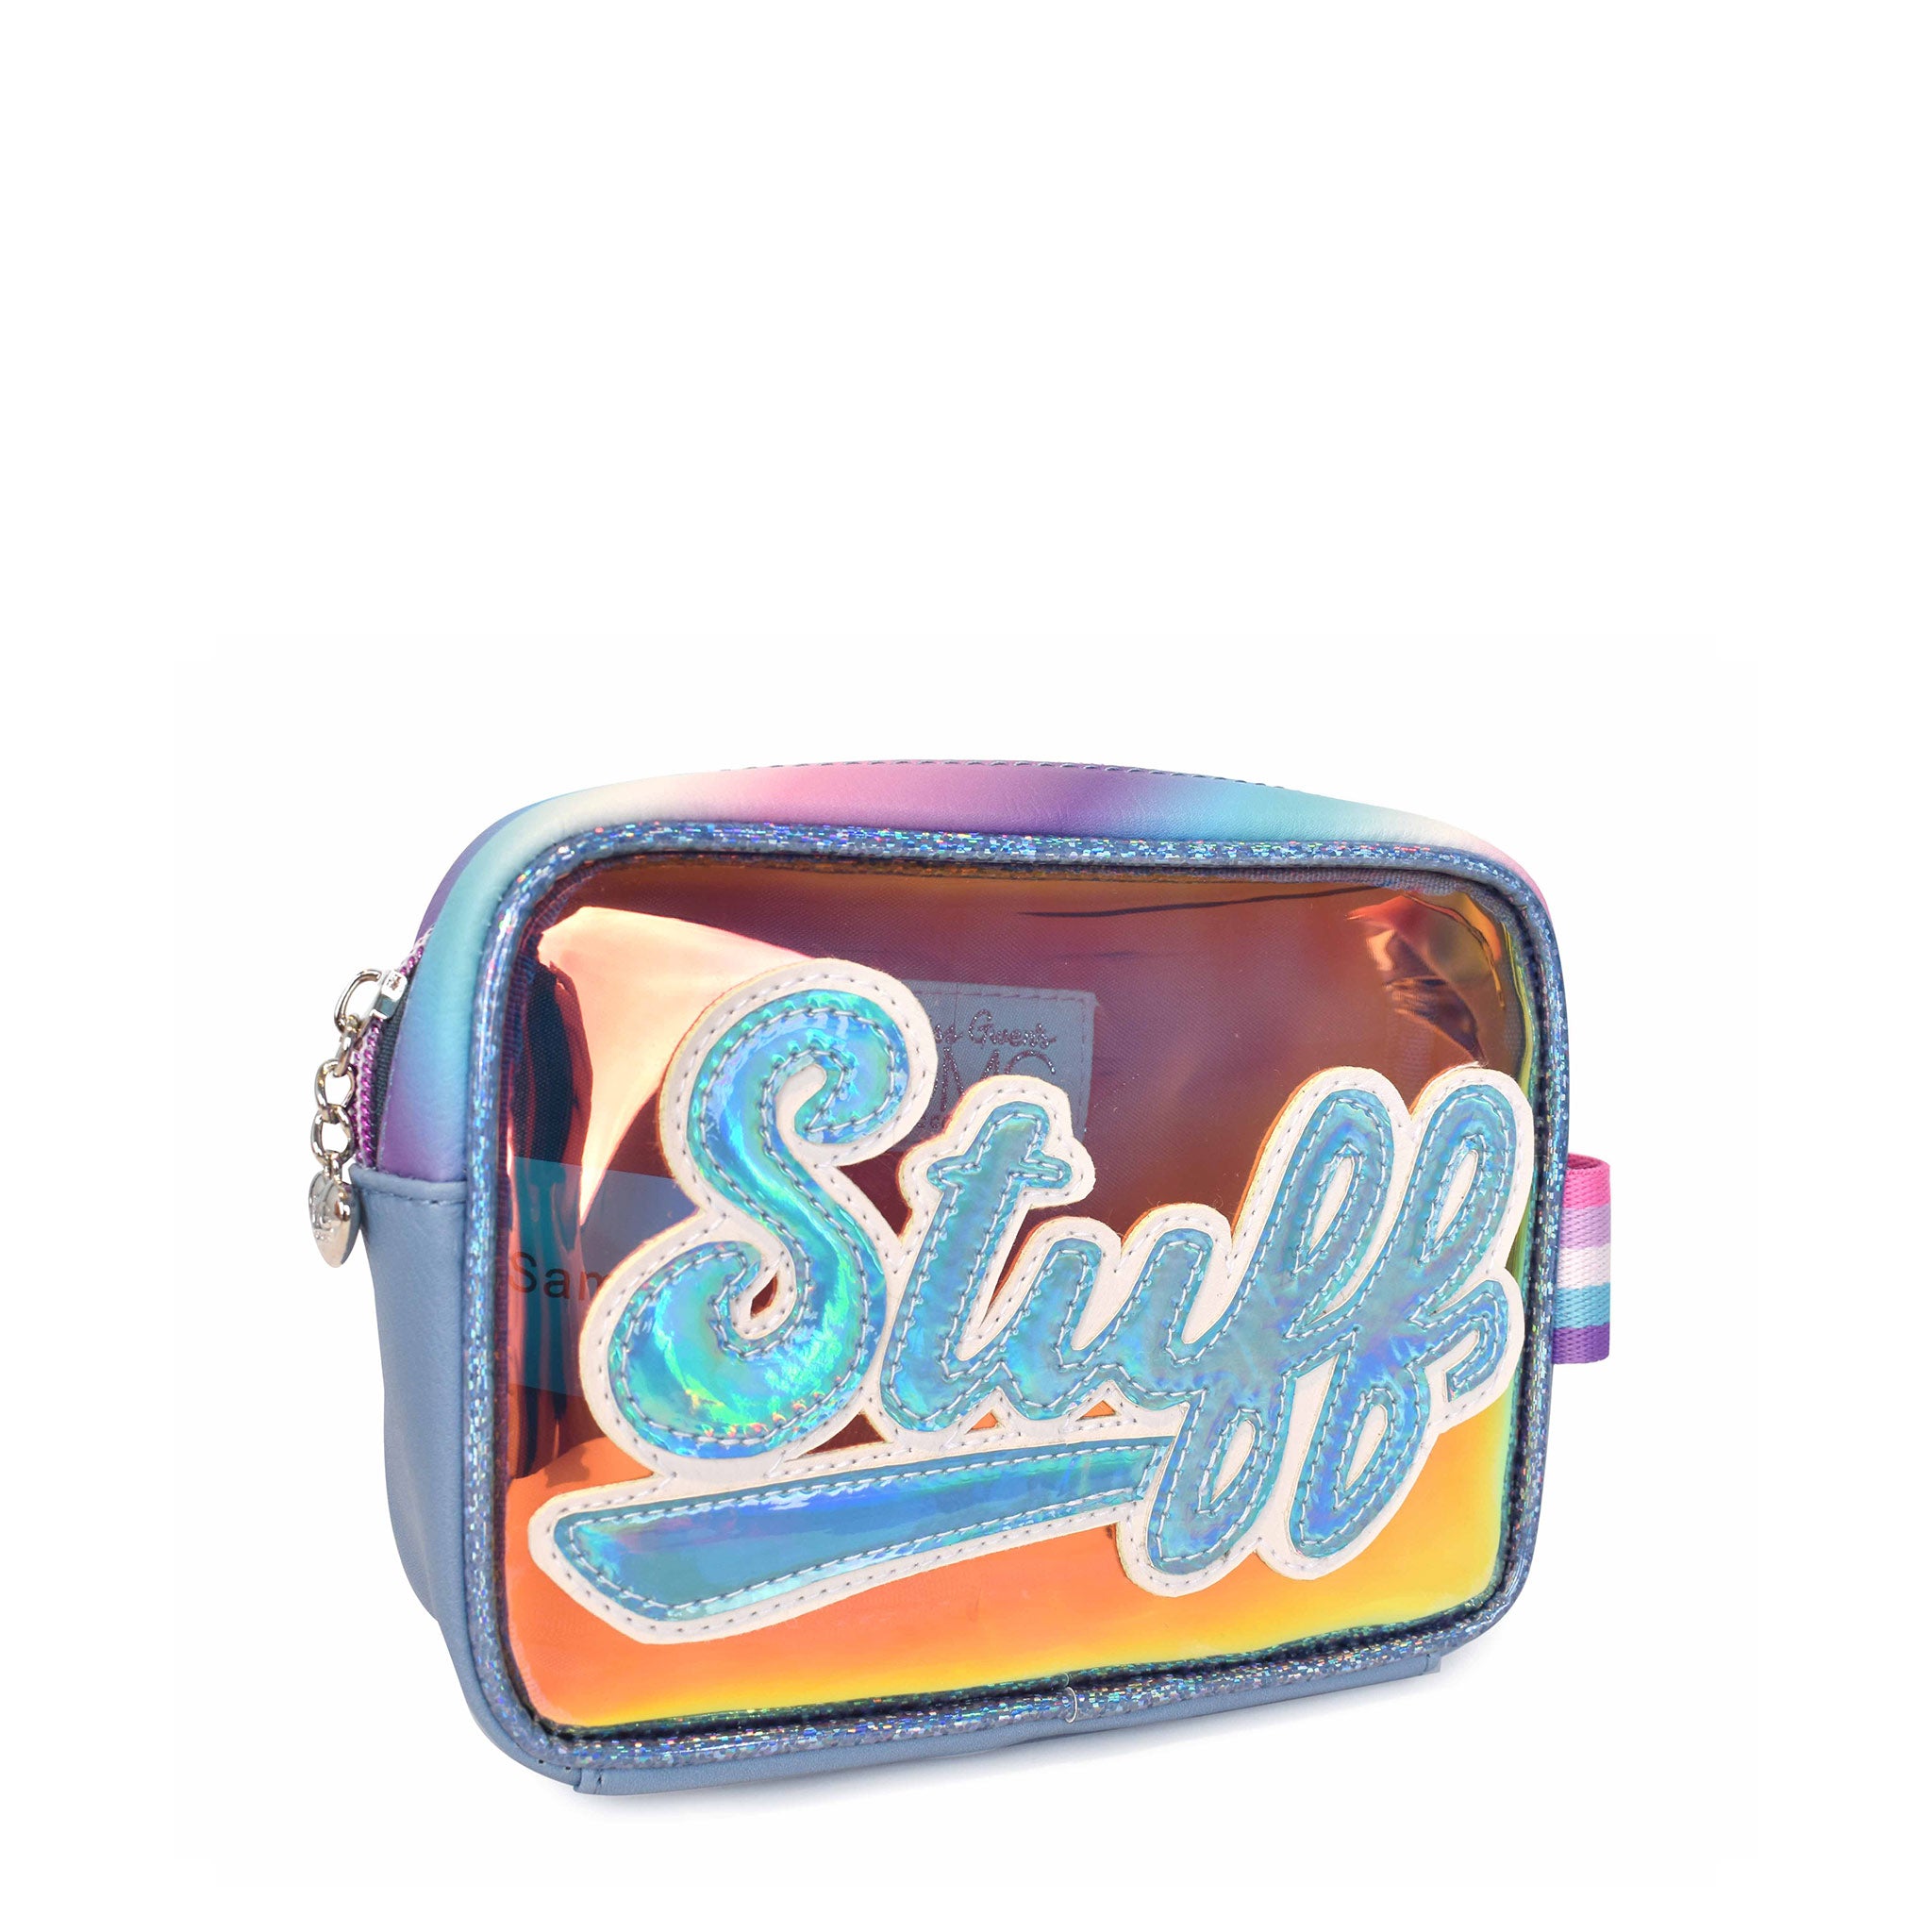 Side view of a blue clear front pencil case with metallic script lettering 'STUFF'